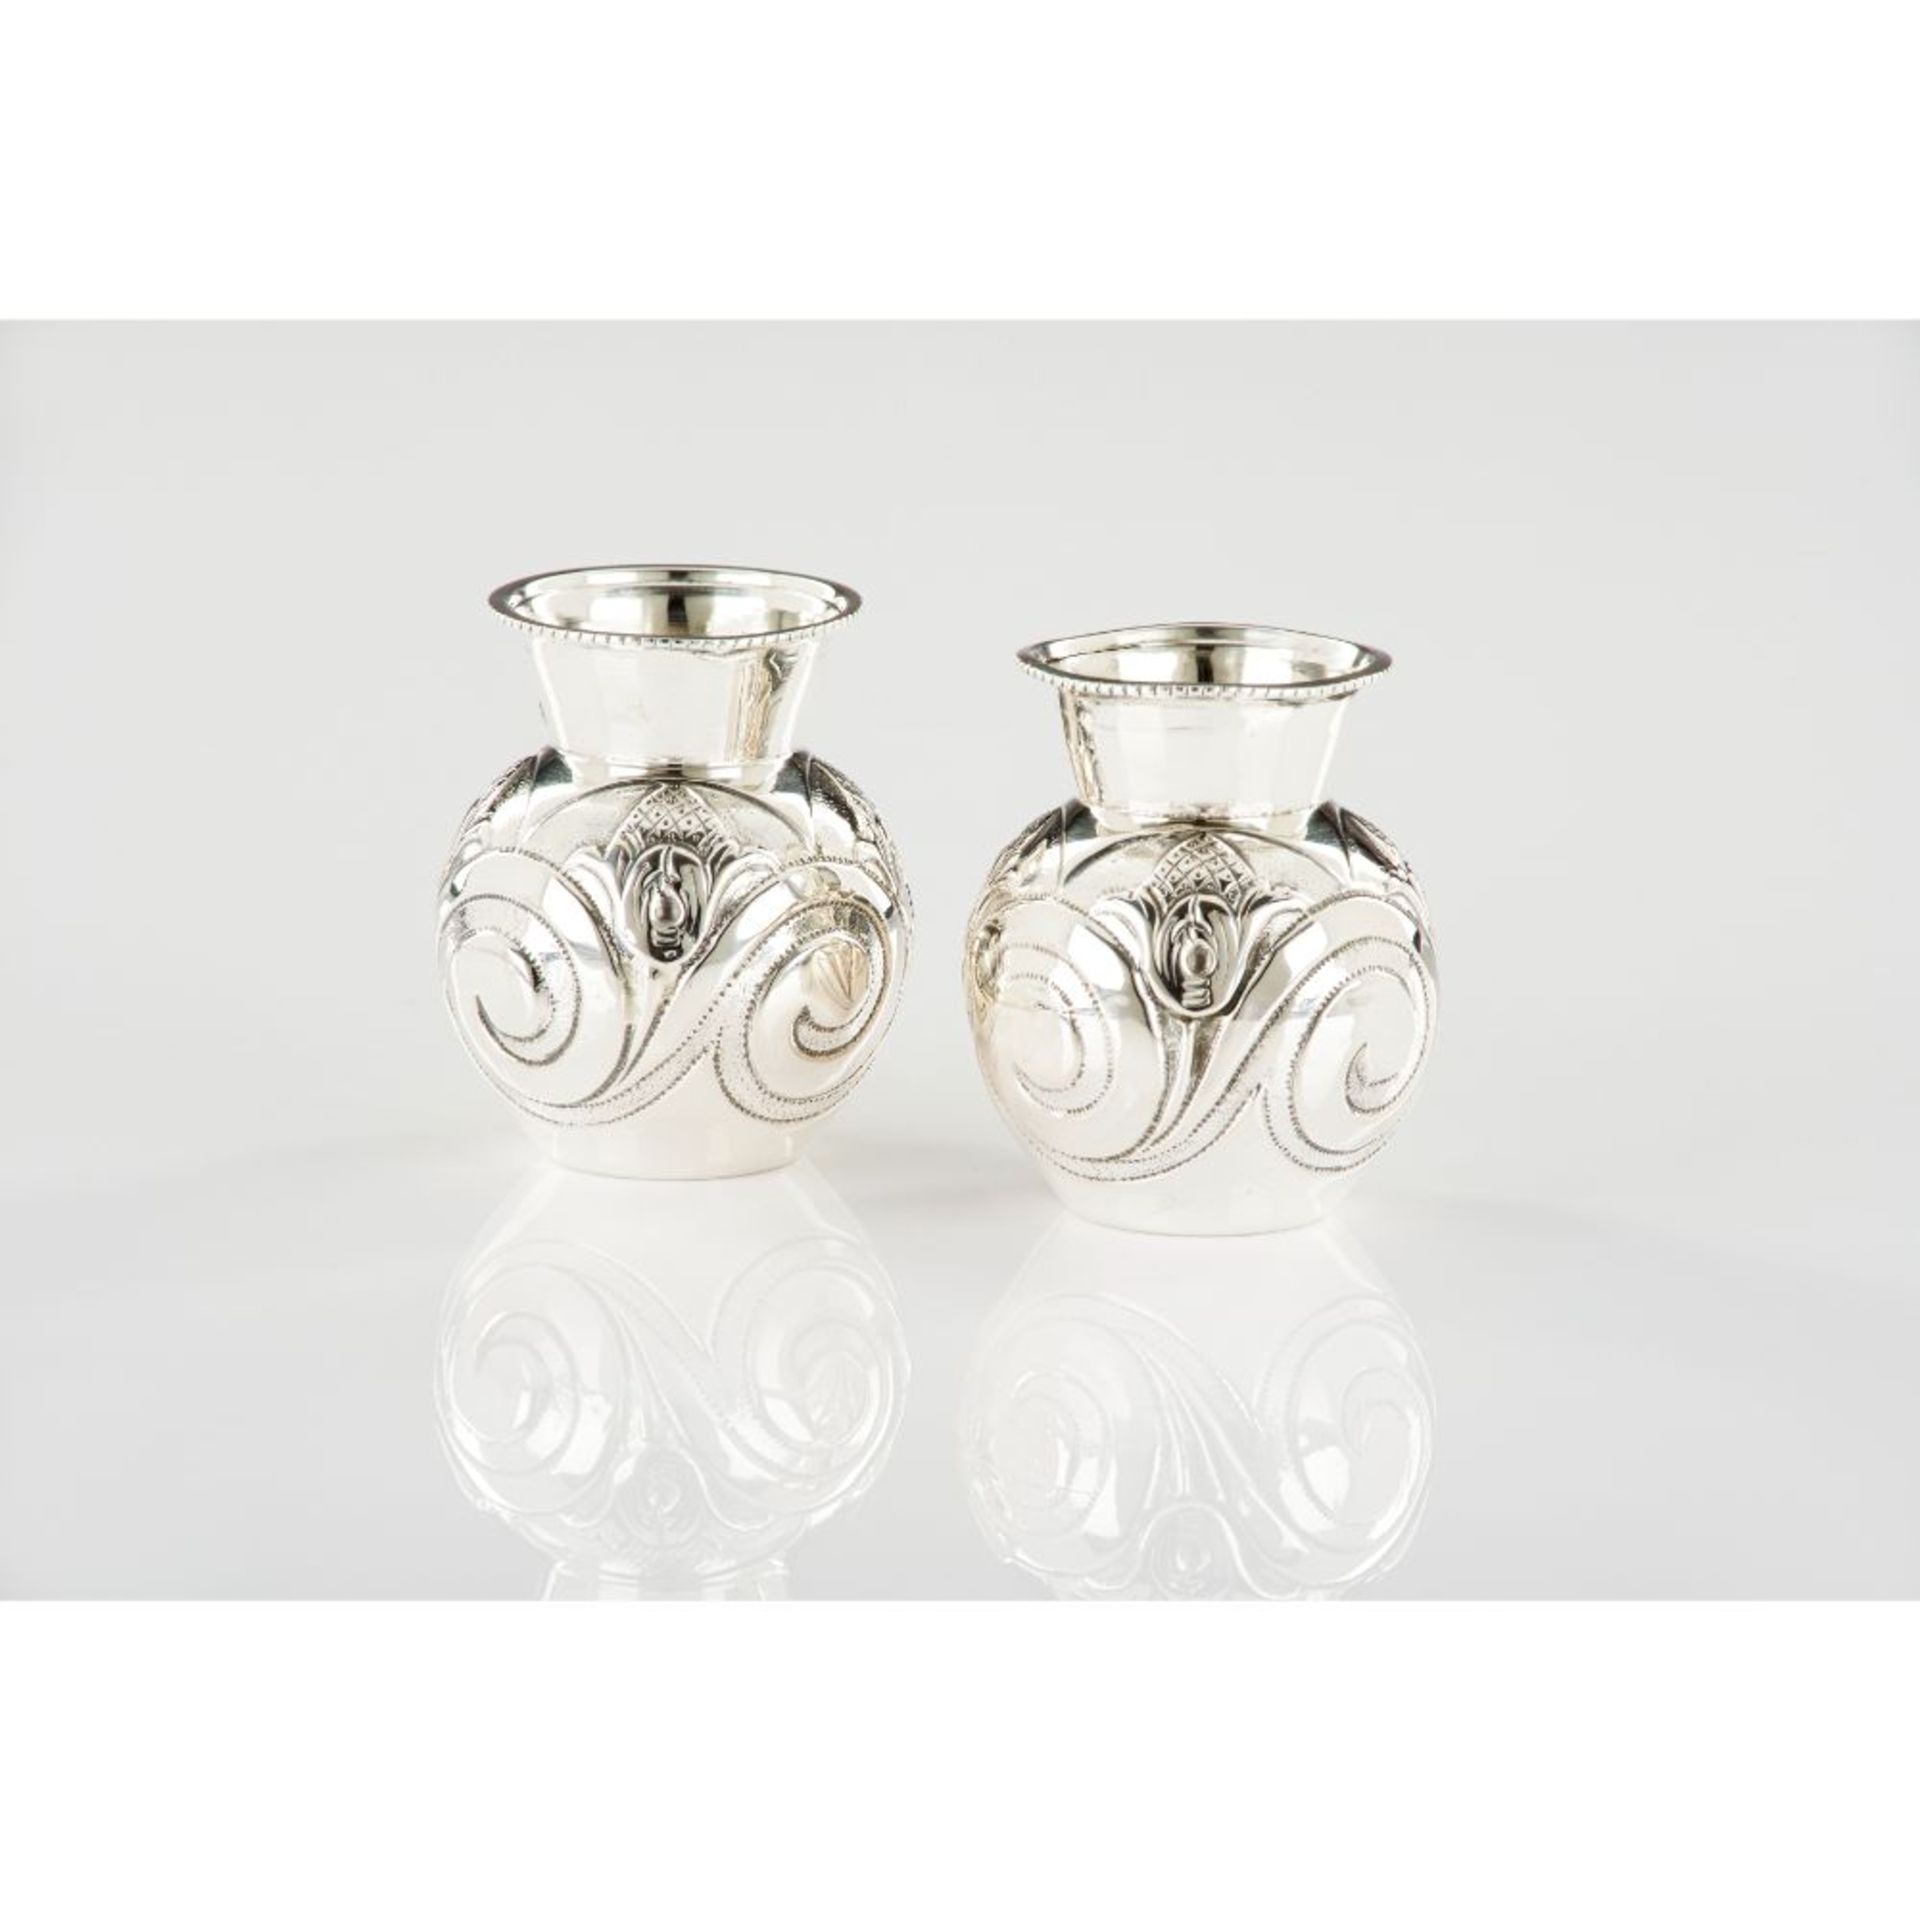 A pair of vases, Silver 833/000, Scroll reliefs decoration, Oporto hallmark (1938-1984), (signs of